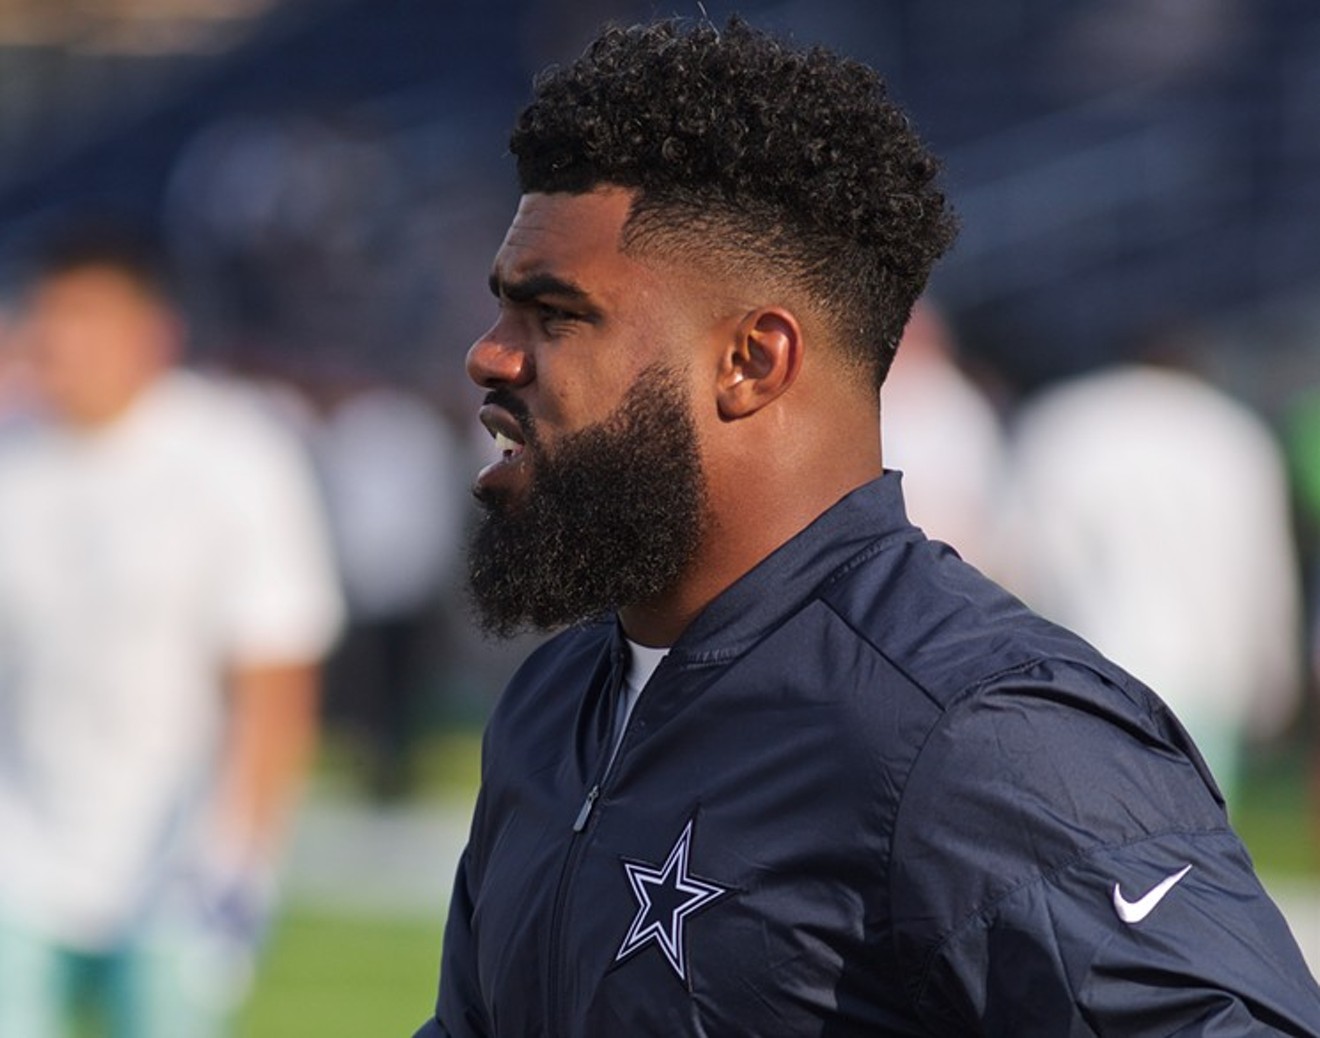 Ezekiel Elliott could be facing a league-issued penalty for an incident in Las Vegas.